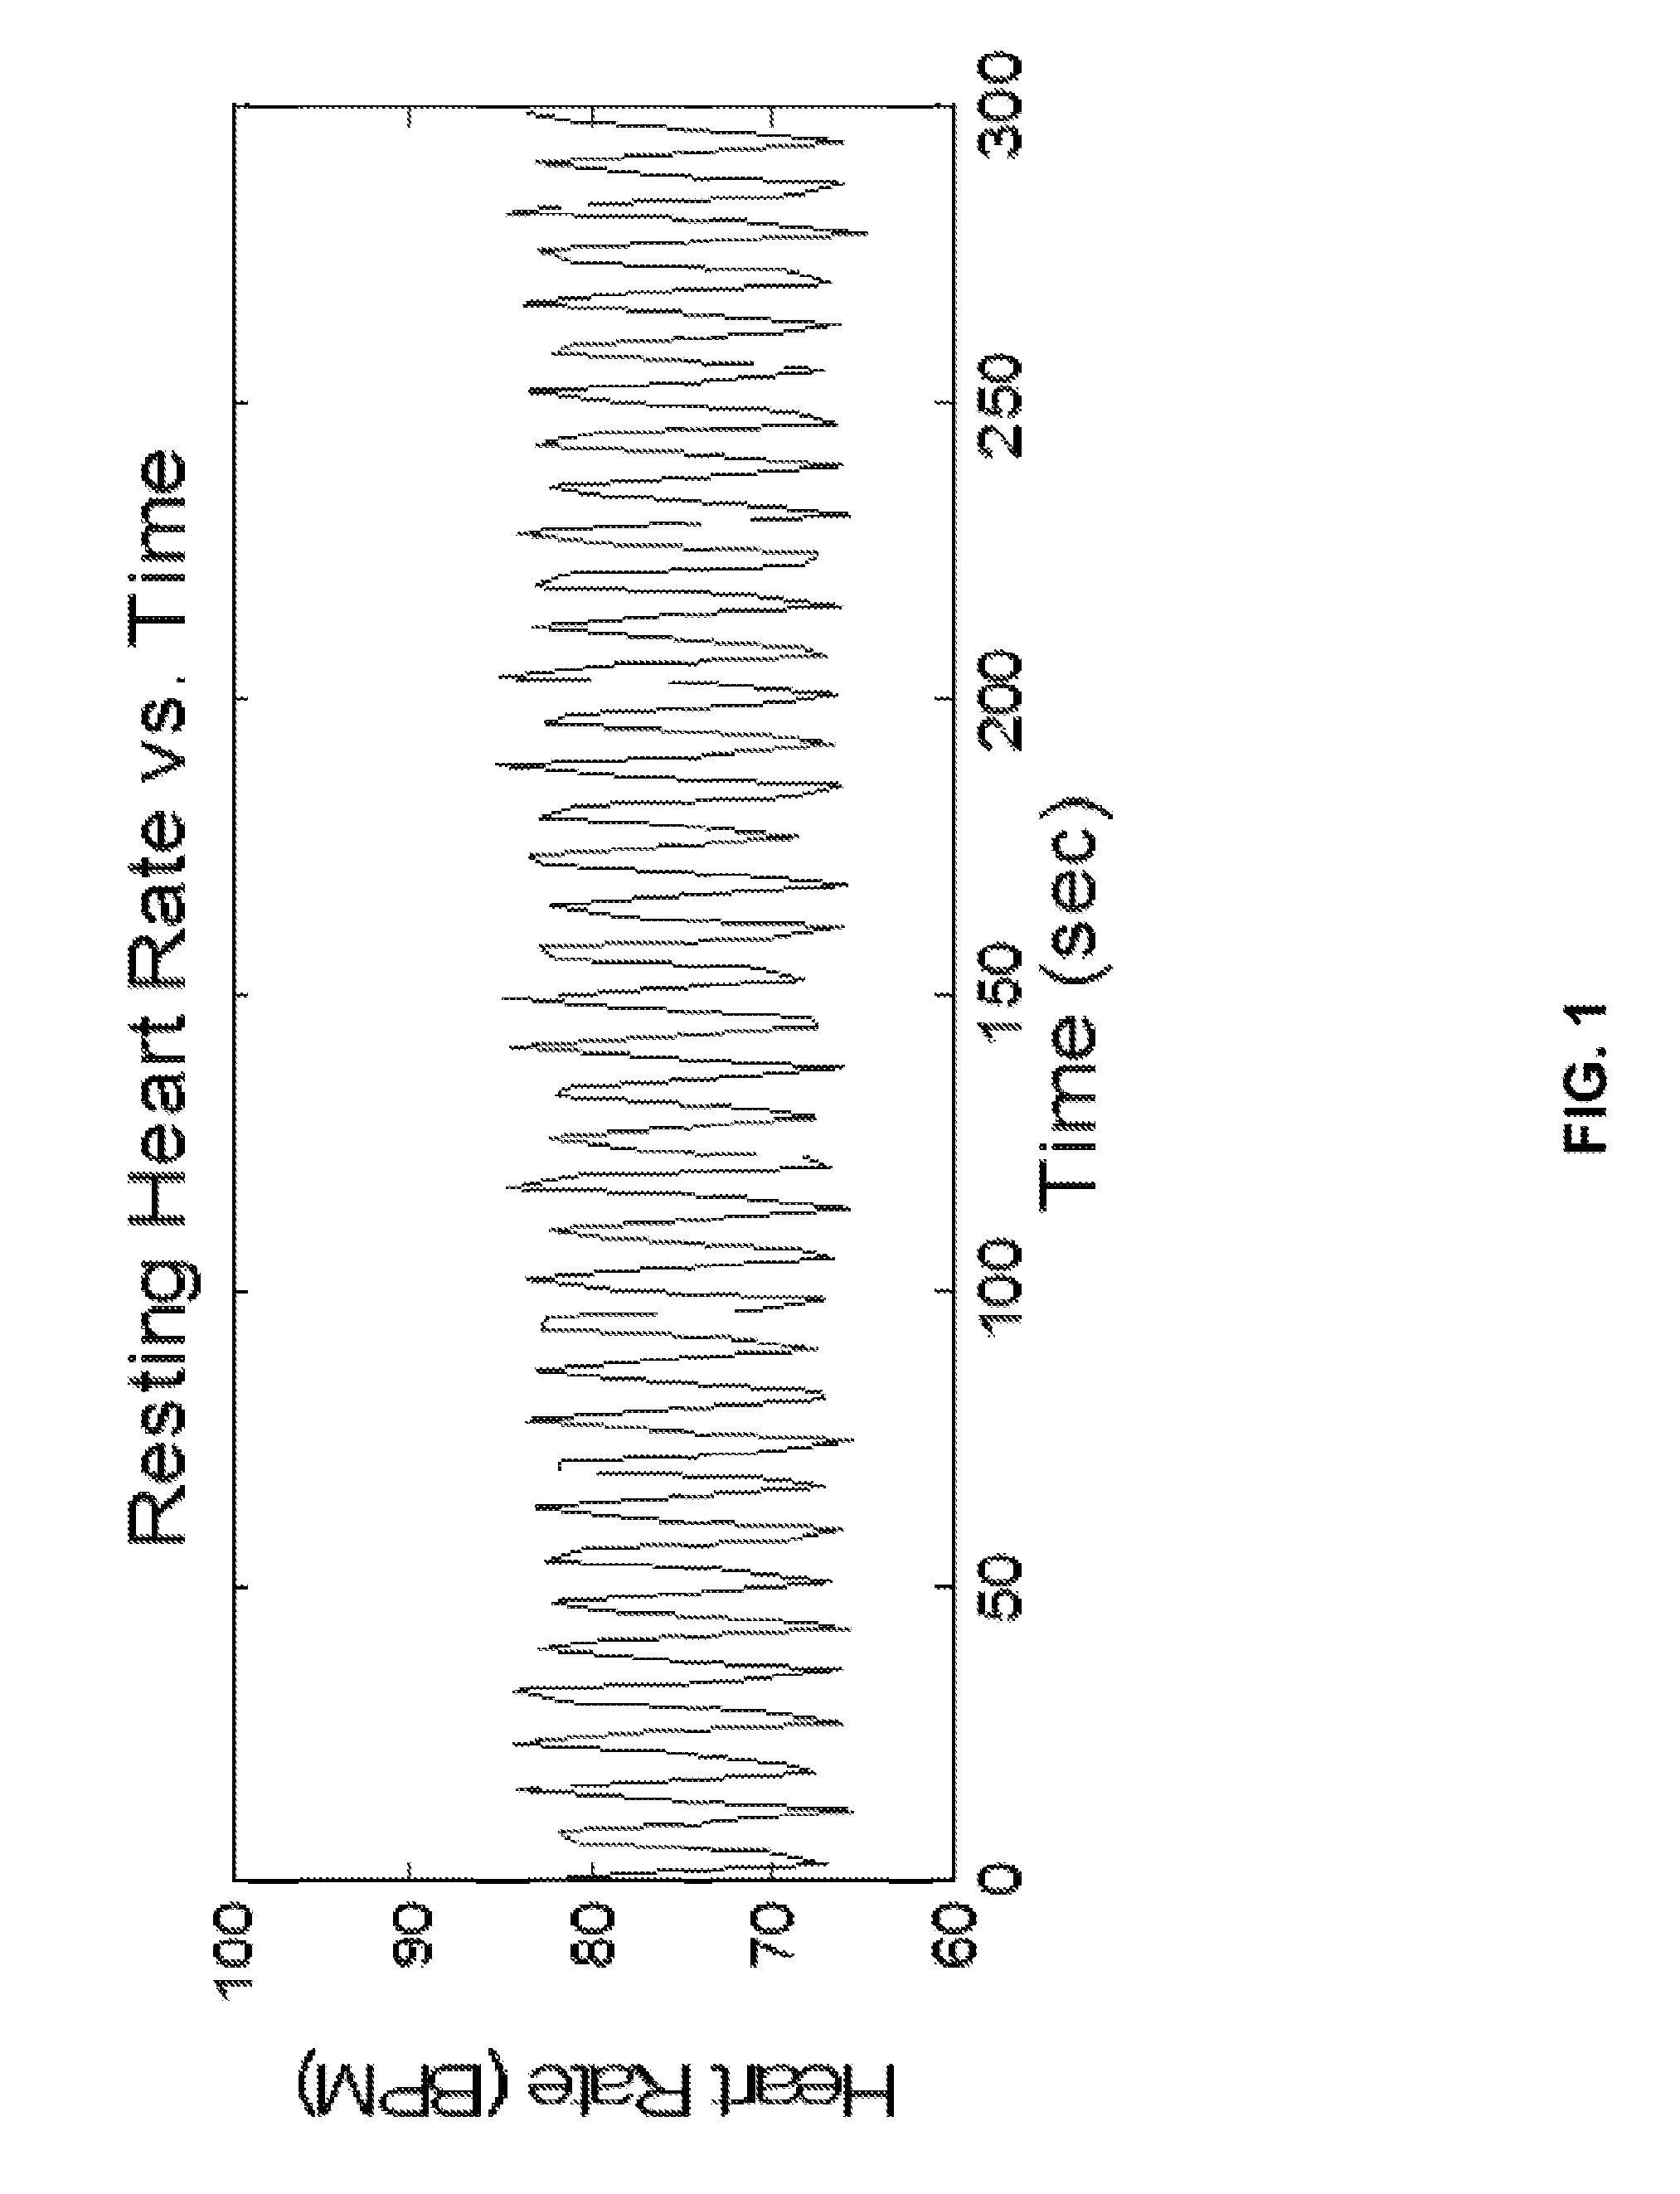 System and method for stress sensing